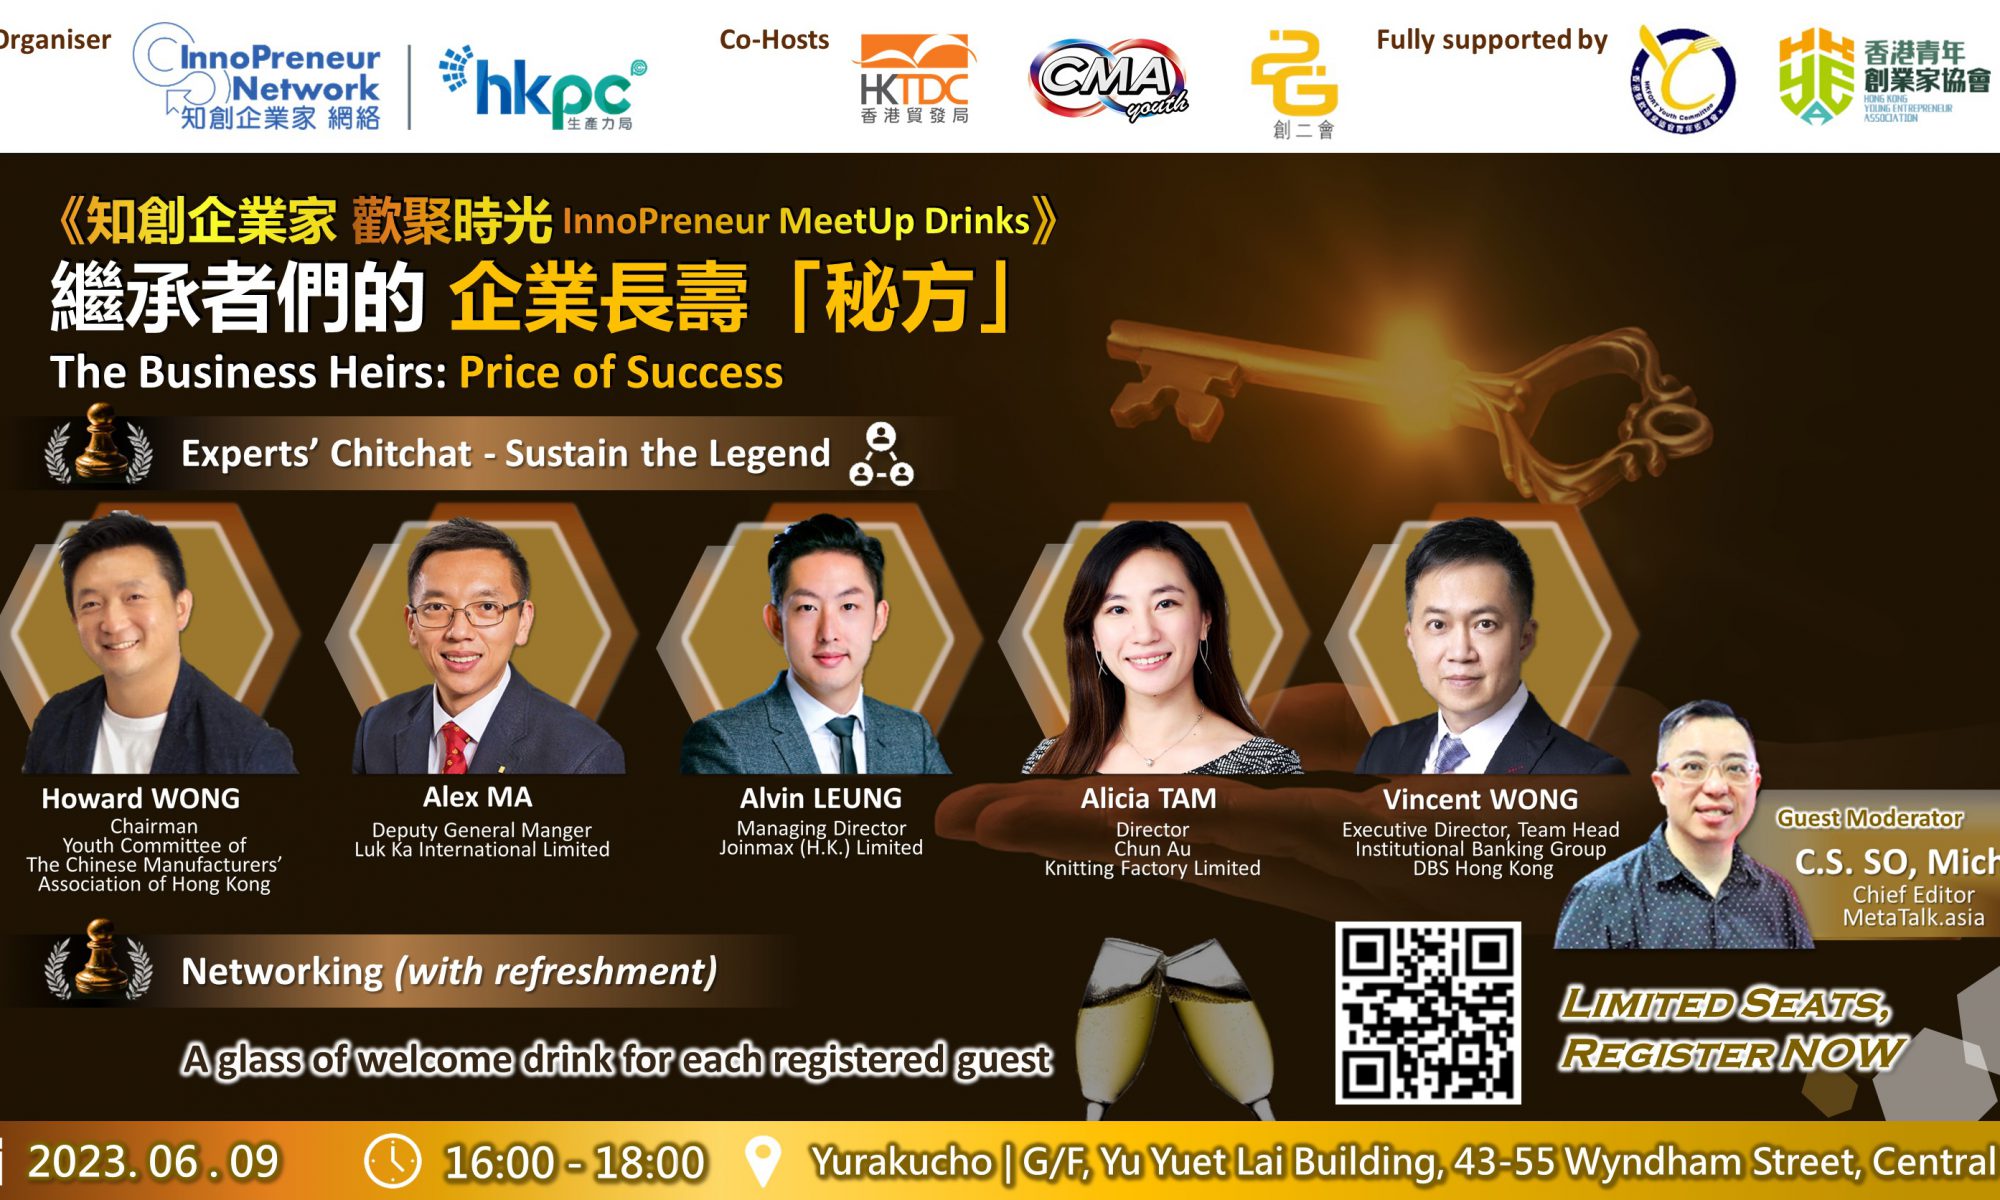 【InnoPreneur MeetUp Drinks】 The Business Heirs: Price of Success